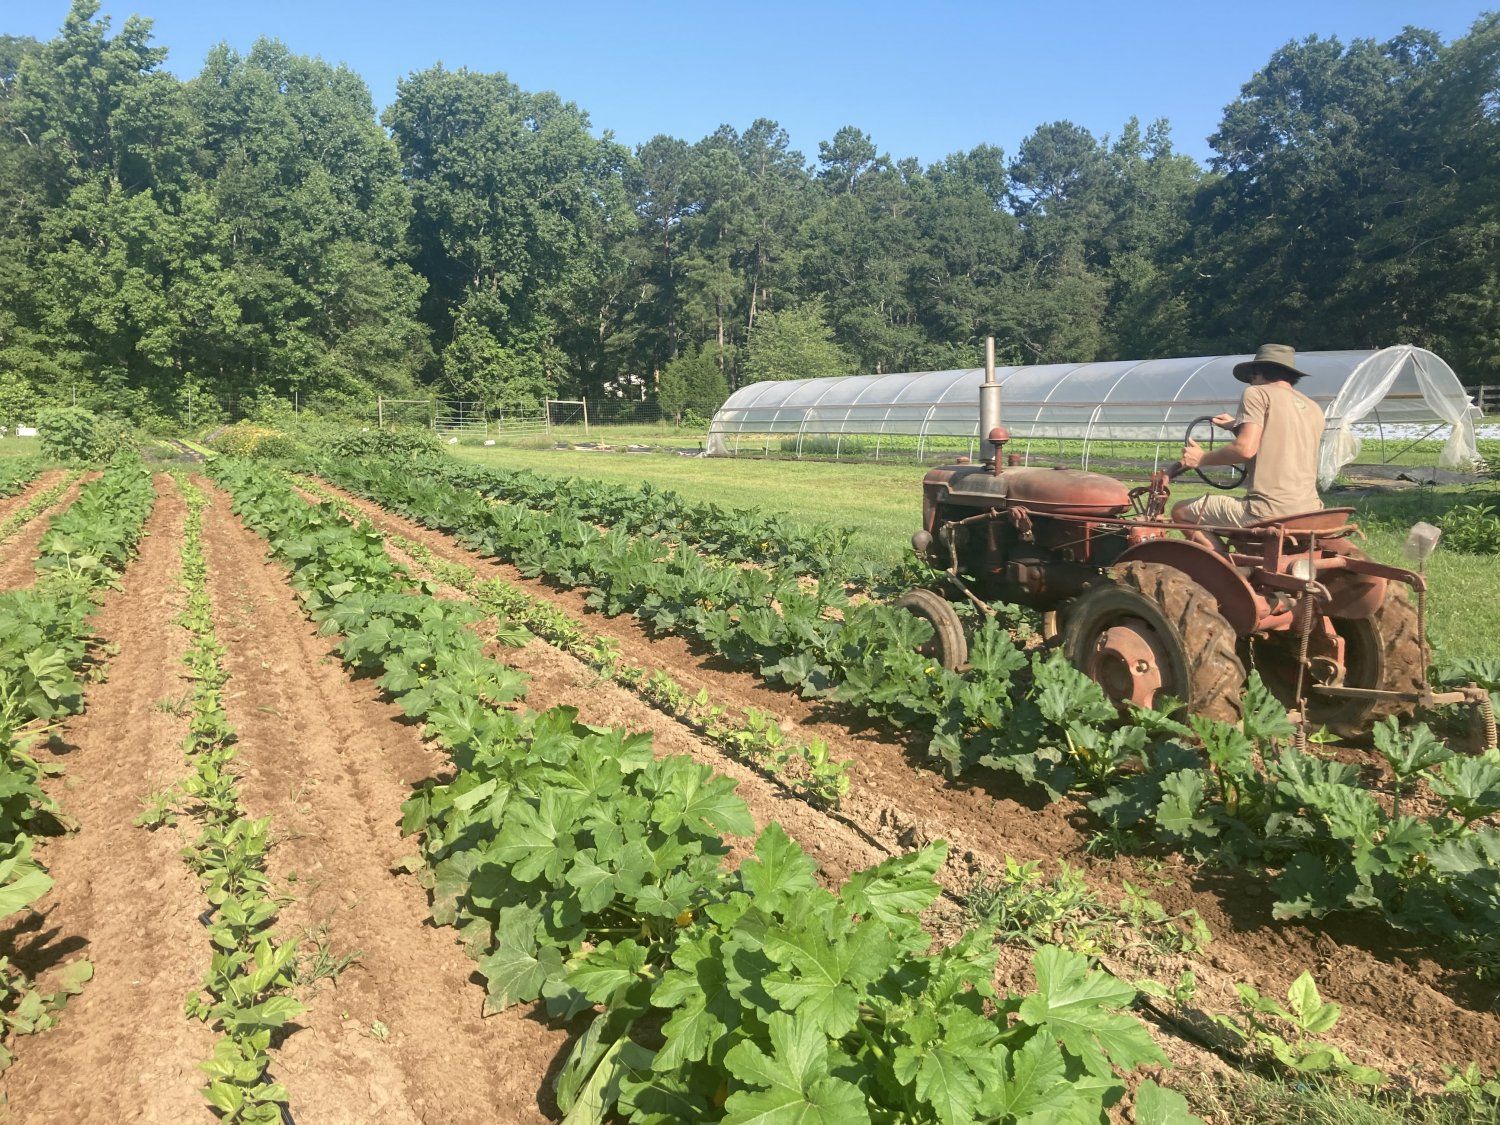 Next Happening: Farm Happenings for July 9, 2021